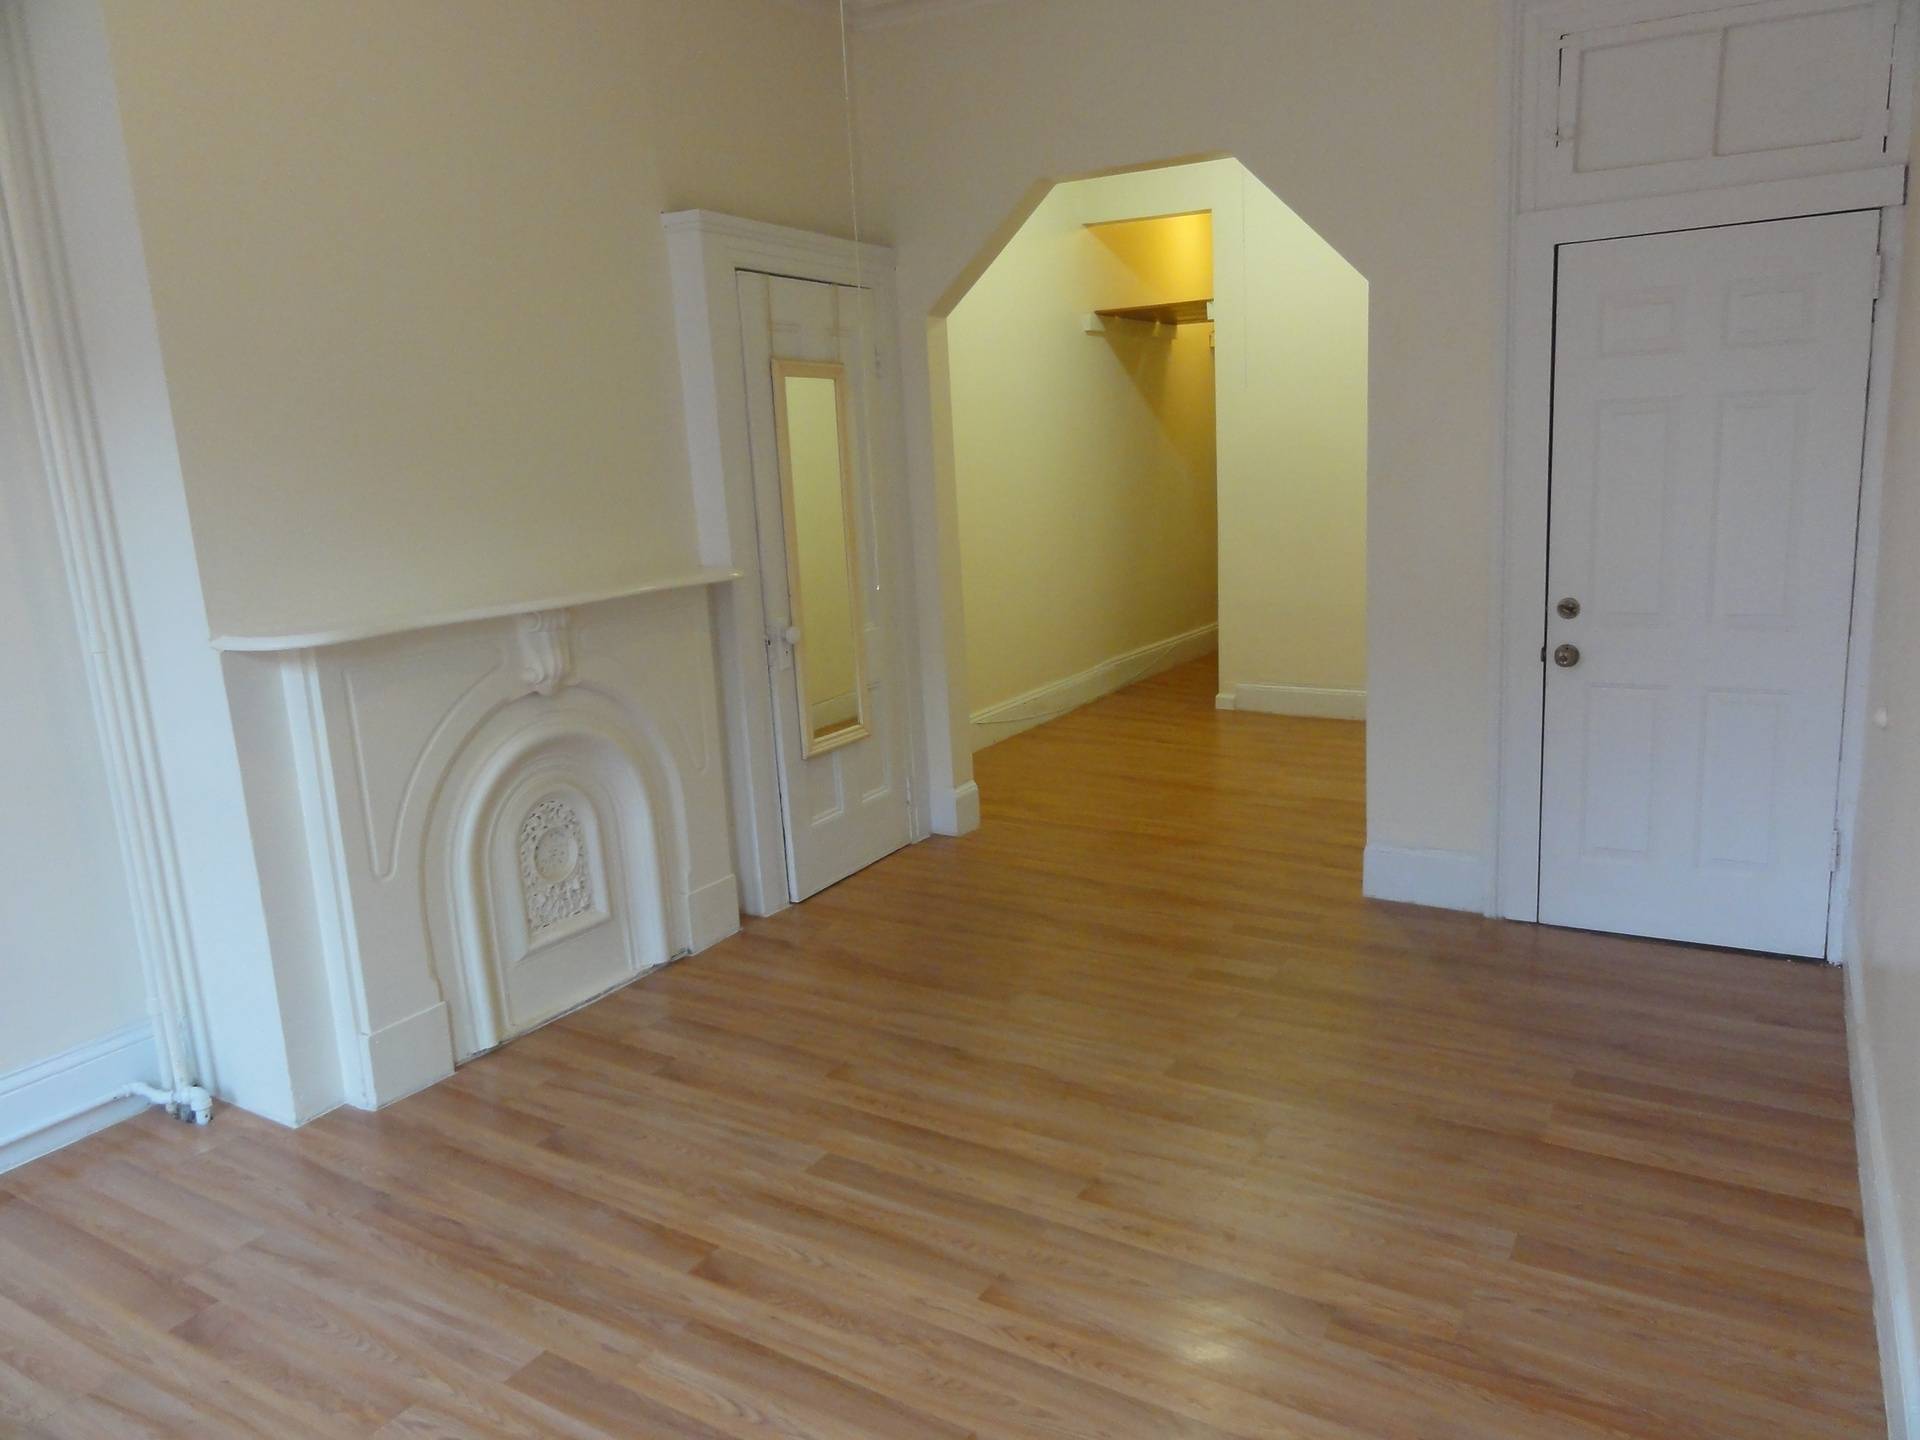 Back on the market I NORTHSIDE WILLIAMSBURG I Studio/1BR CONVERTIBLE I Come Check it out!!!